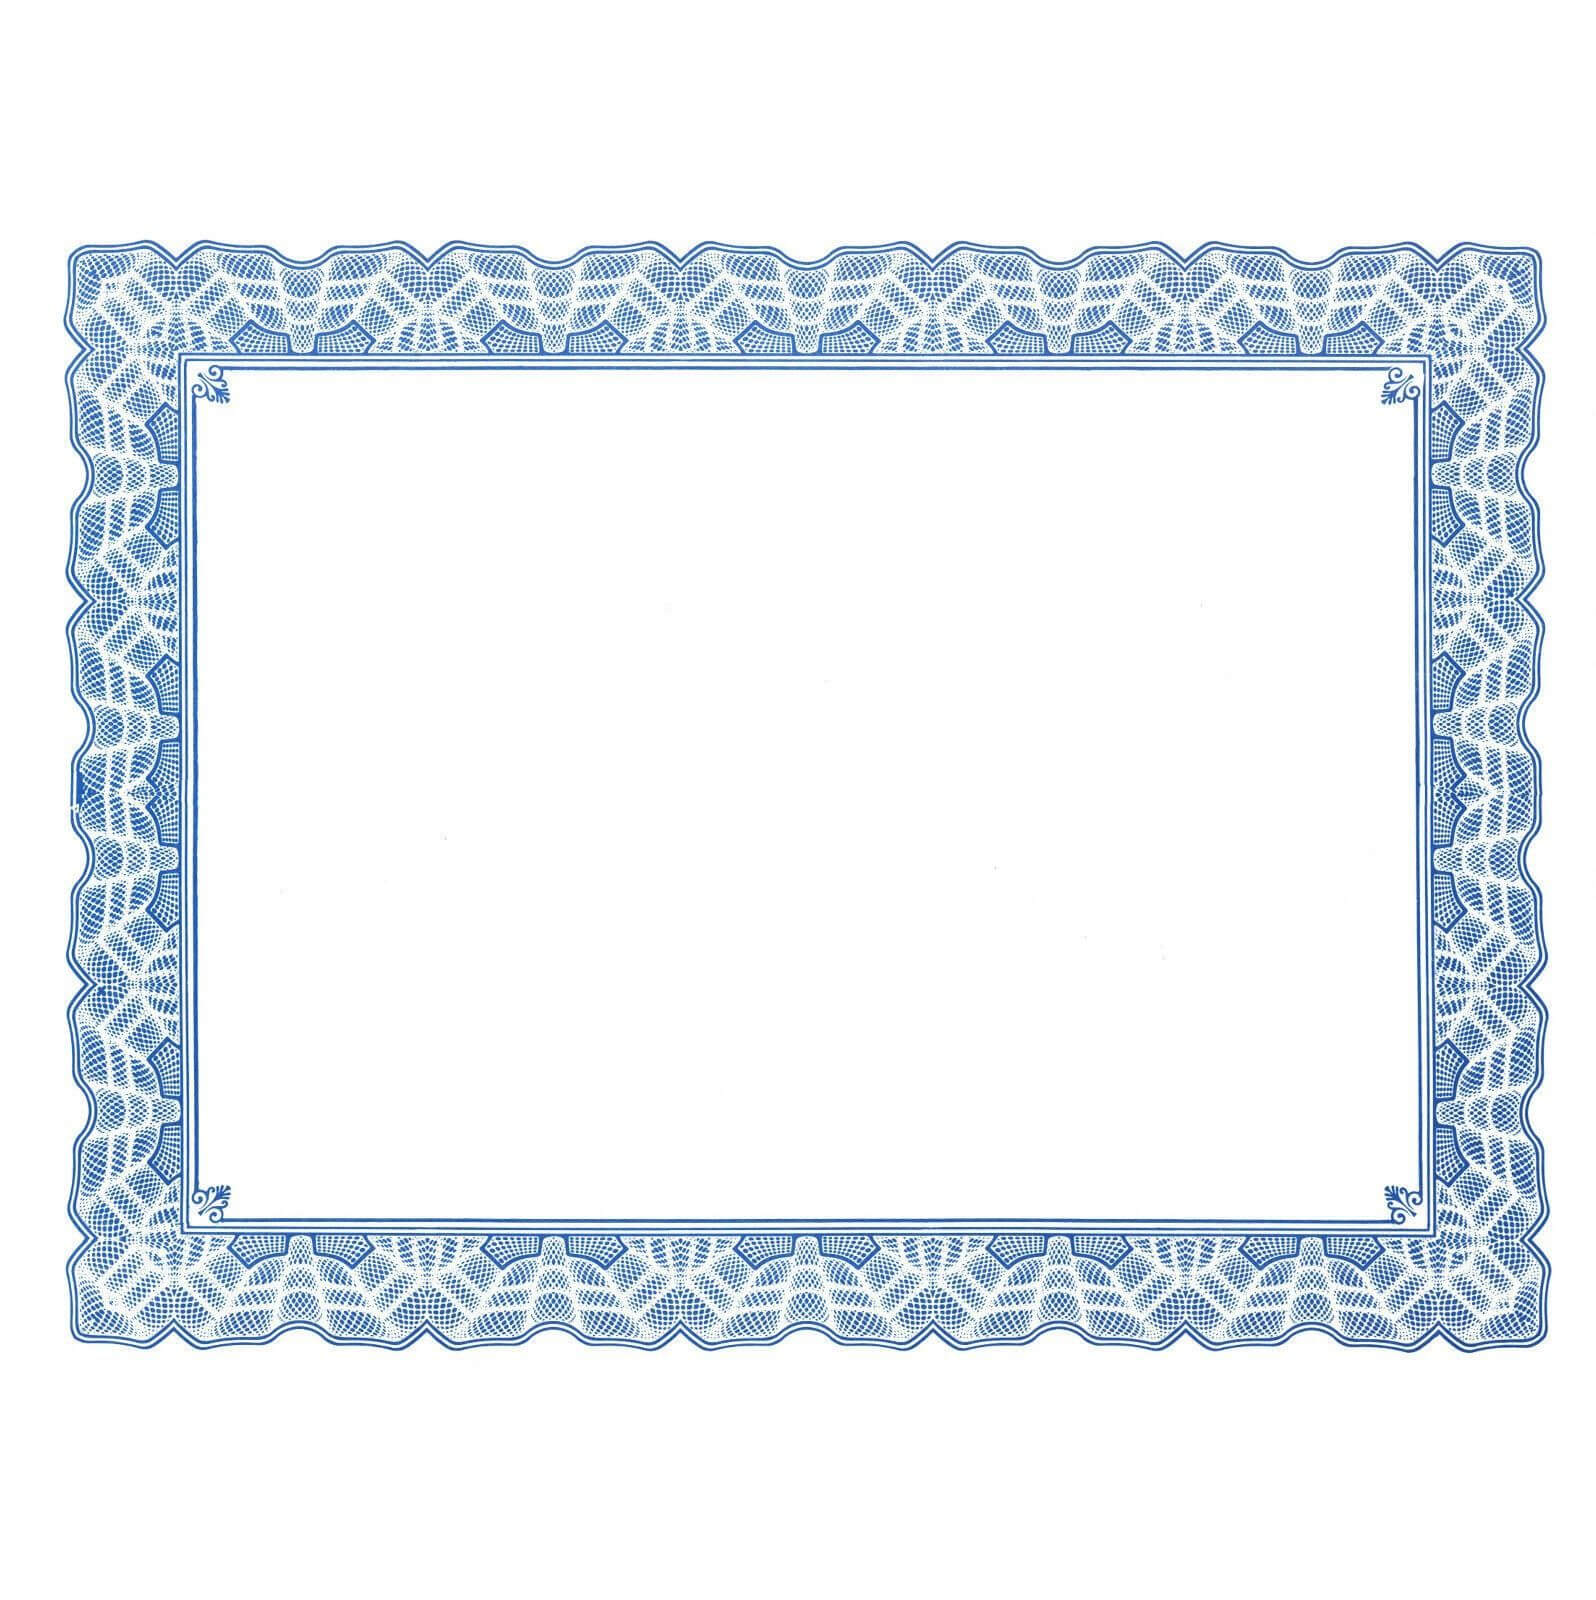 Certificate Border Templates For Word  | Pictures In 2019 Intended For Award Certificate Border Template